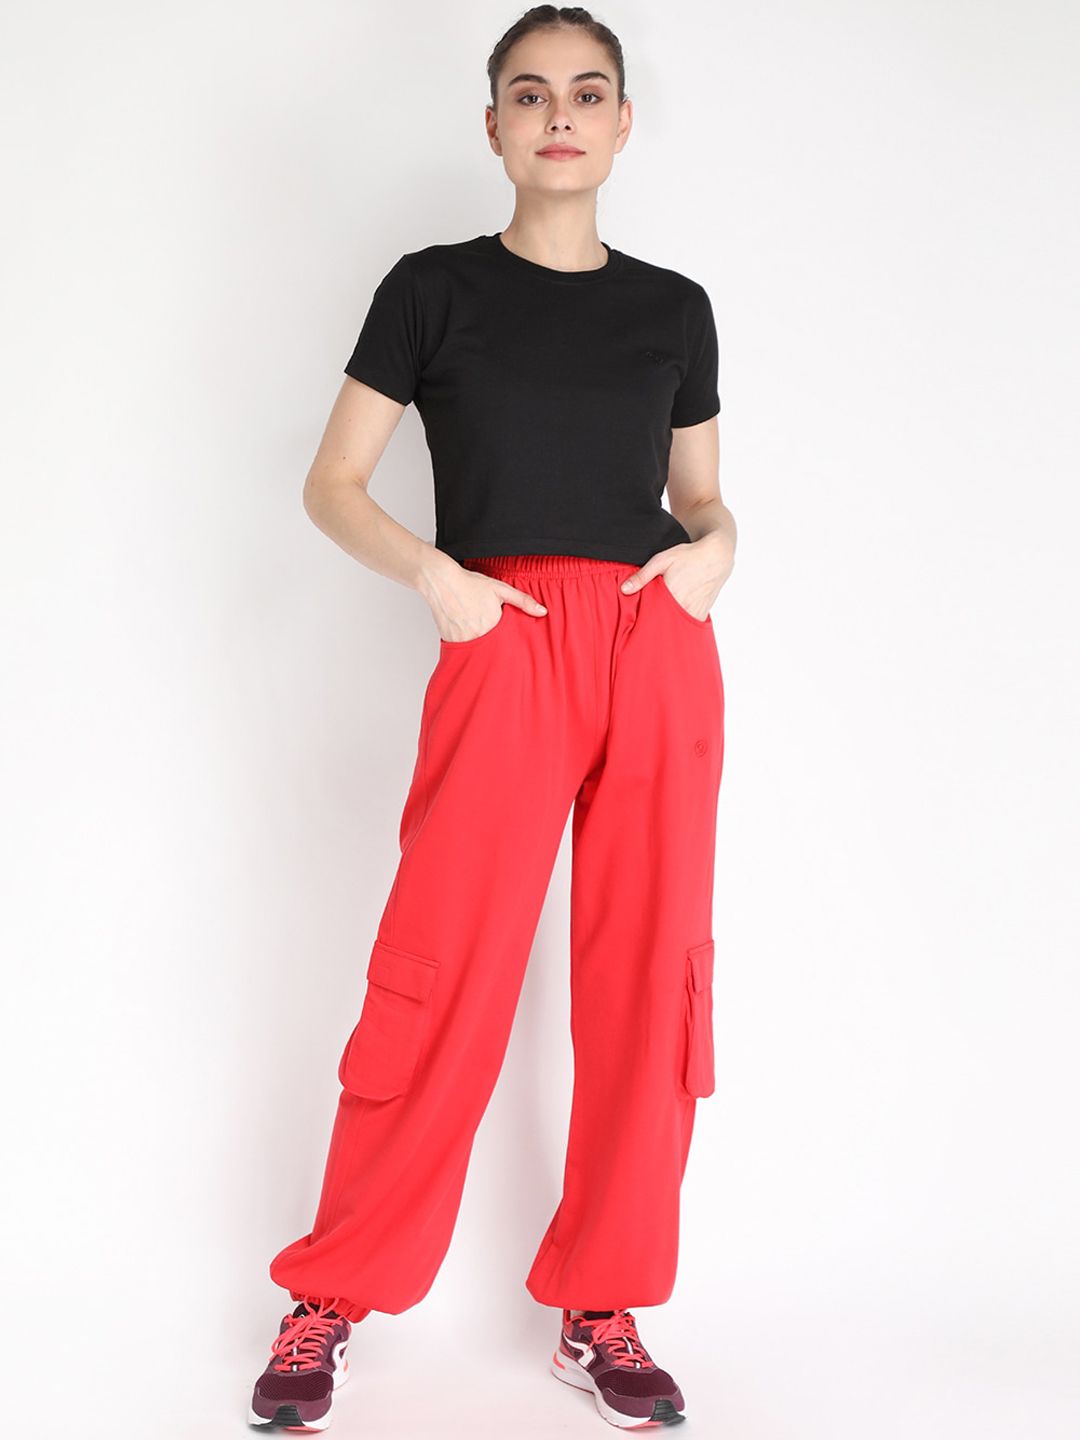 Chkokko Women Black & Red Solid Tracksuit Price in India